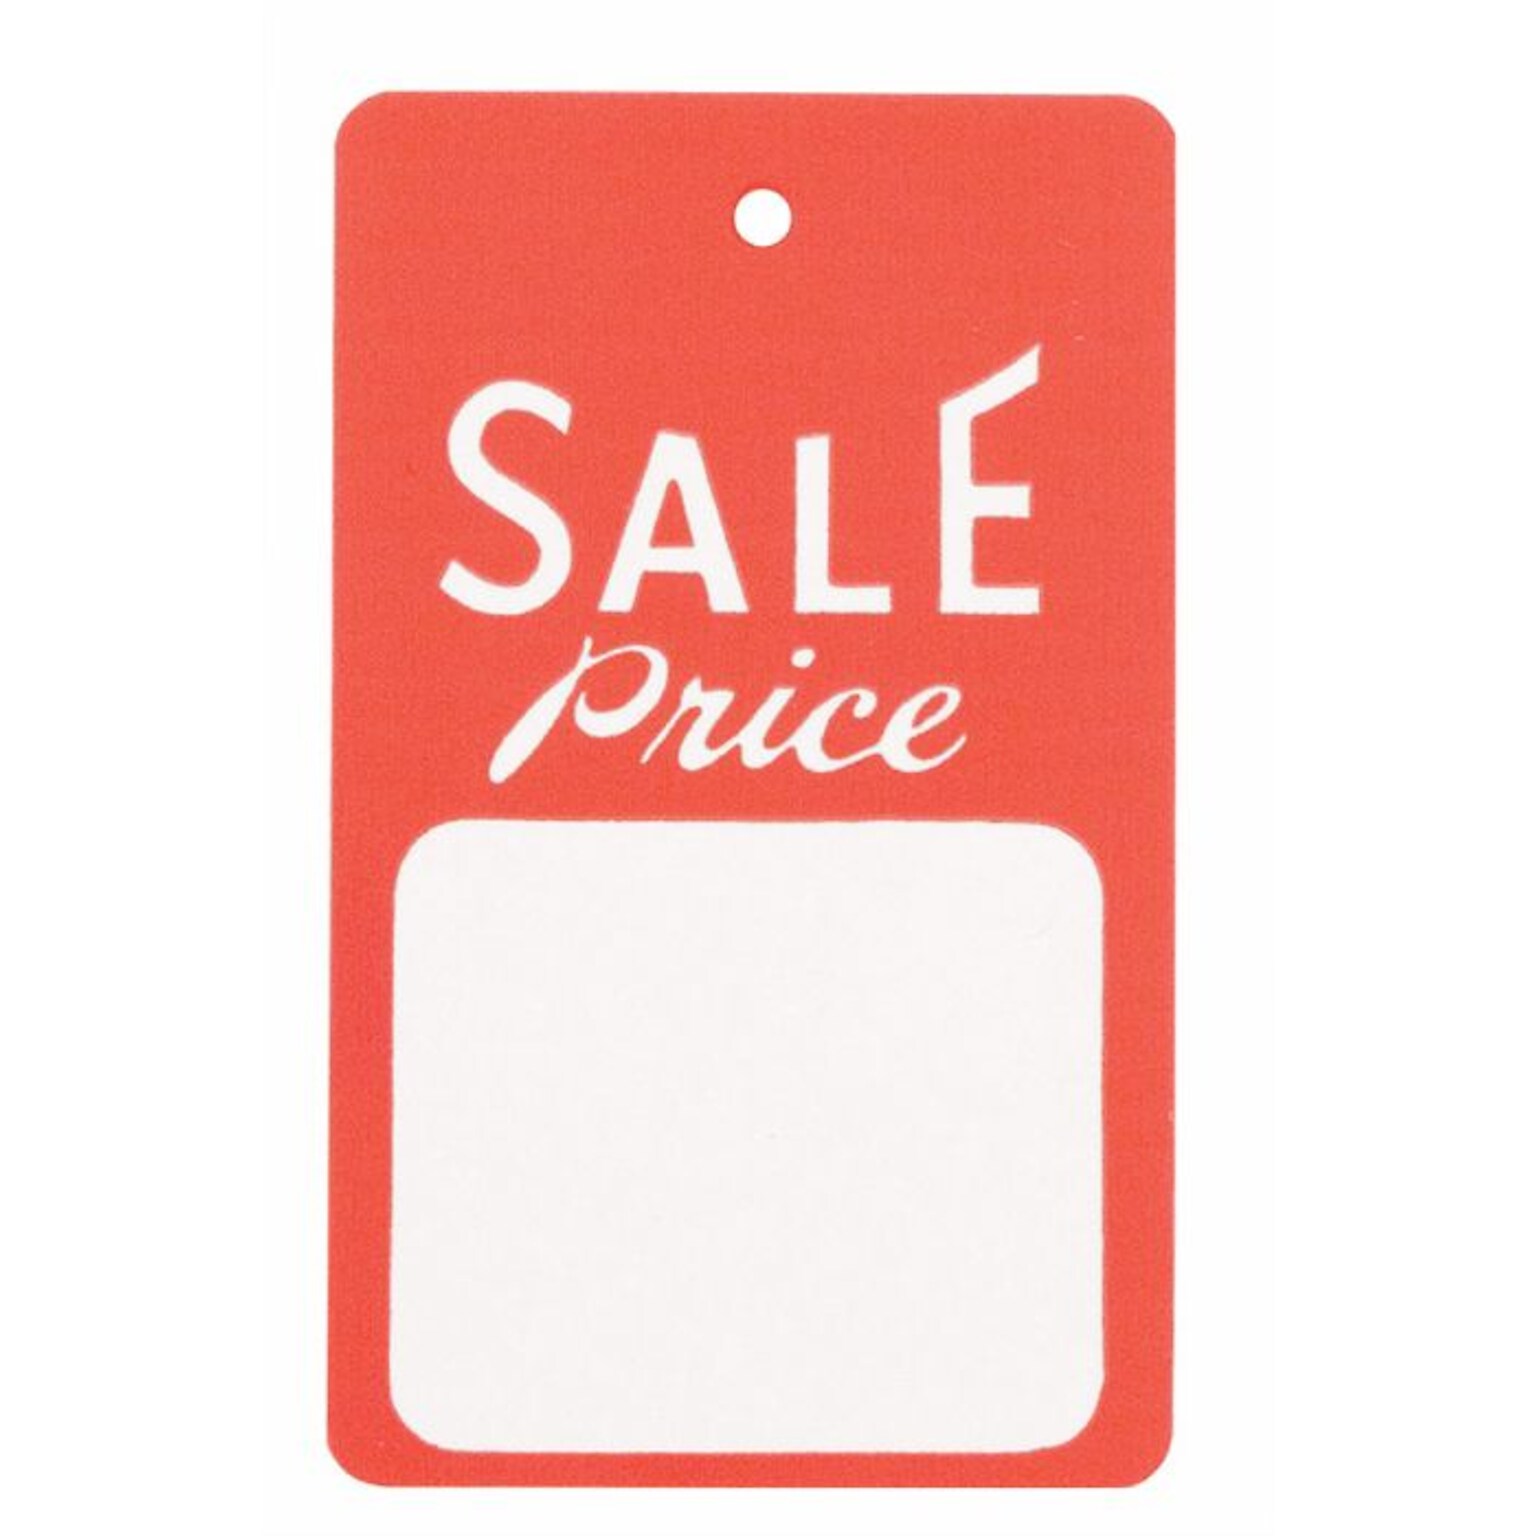 NAHANCO 1 3/4 x 2 7/8 Large Strung Sale Tag, Red/White, 1000/Pack, 1000/Pack